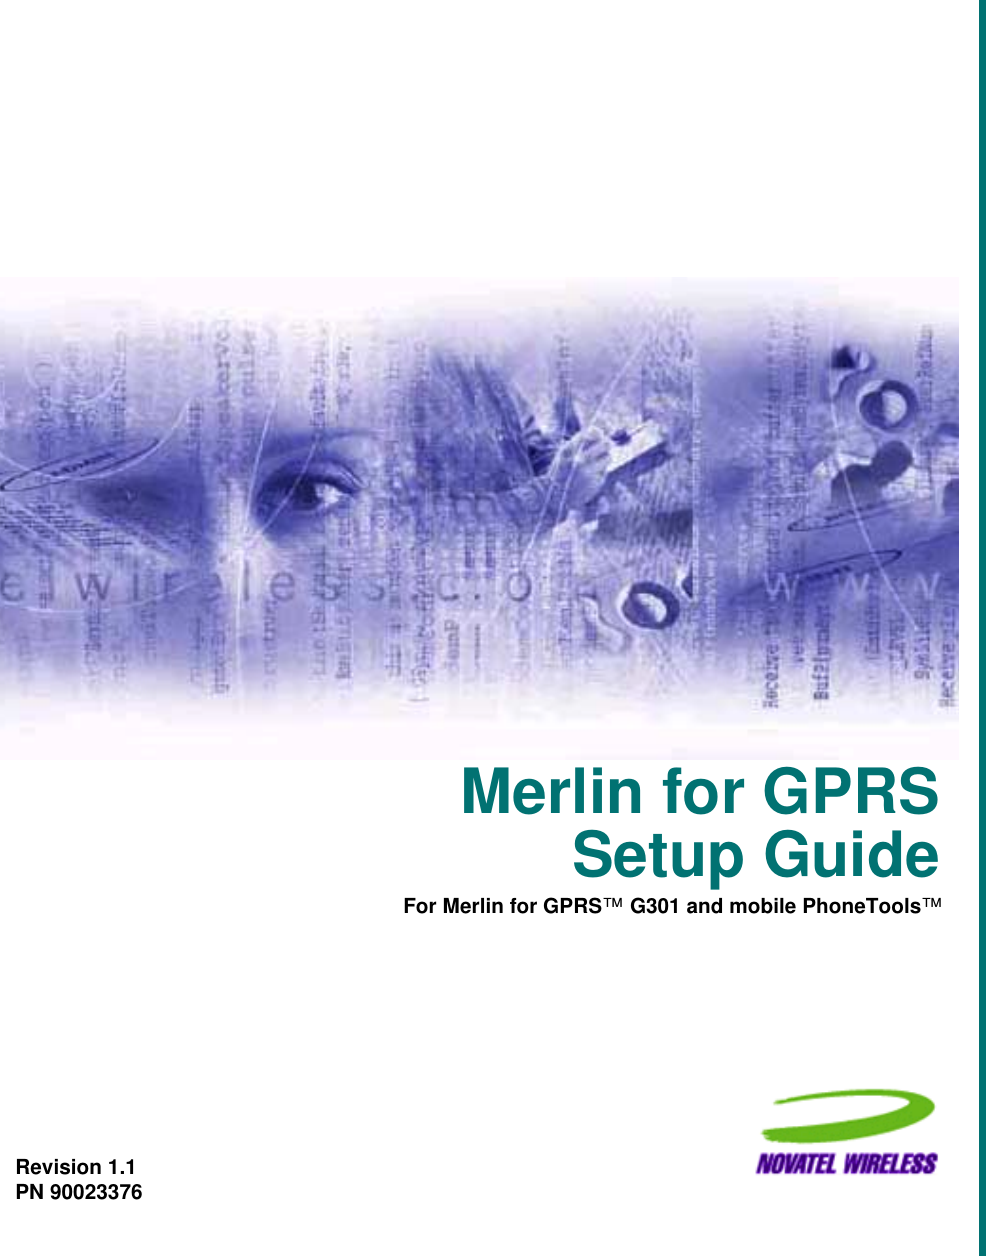 Merlin for GPRSSetup GuideRevision 1.1PN 90023376 For Merlin for GPRS™ G301 and mobile PhoneTools™